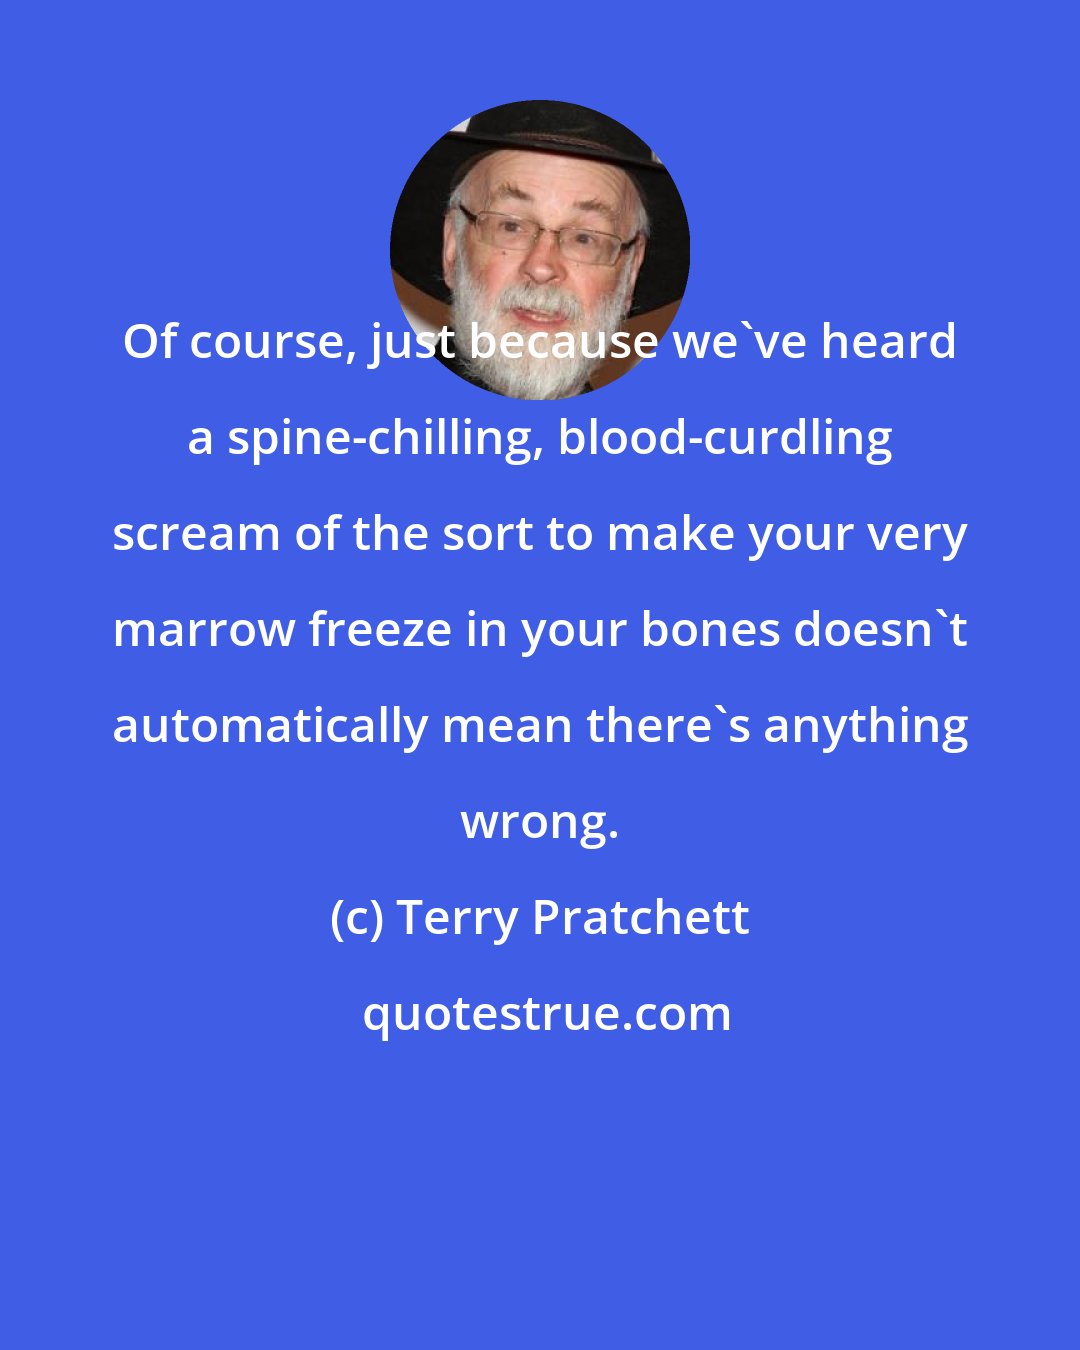 Terry Pratchett: Of course, just because we've heard a spine-chilling, blood-curdling scream of the sort to make your very marrow freeze in your bones doesn't automatically mean there's anything wrong.